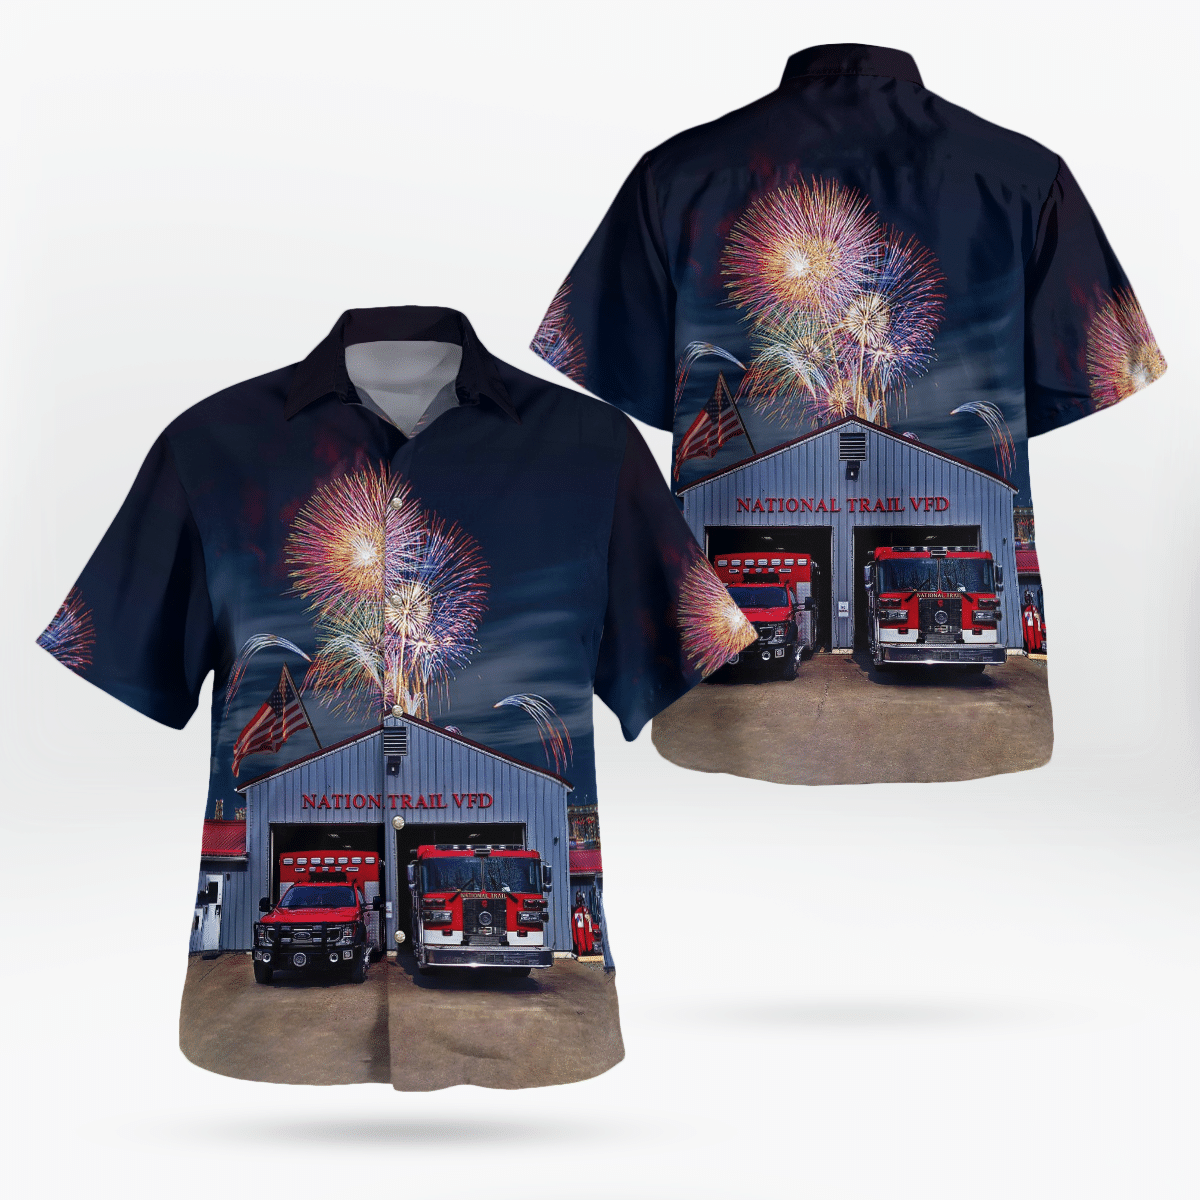 HOT Gratiot, Ohio, National Trail Fire Department 4th of July Tropical Shirt1